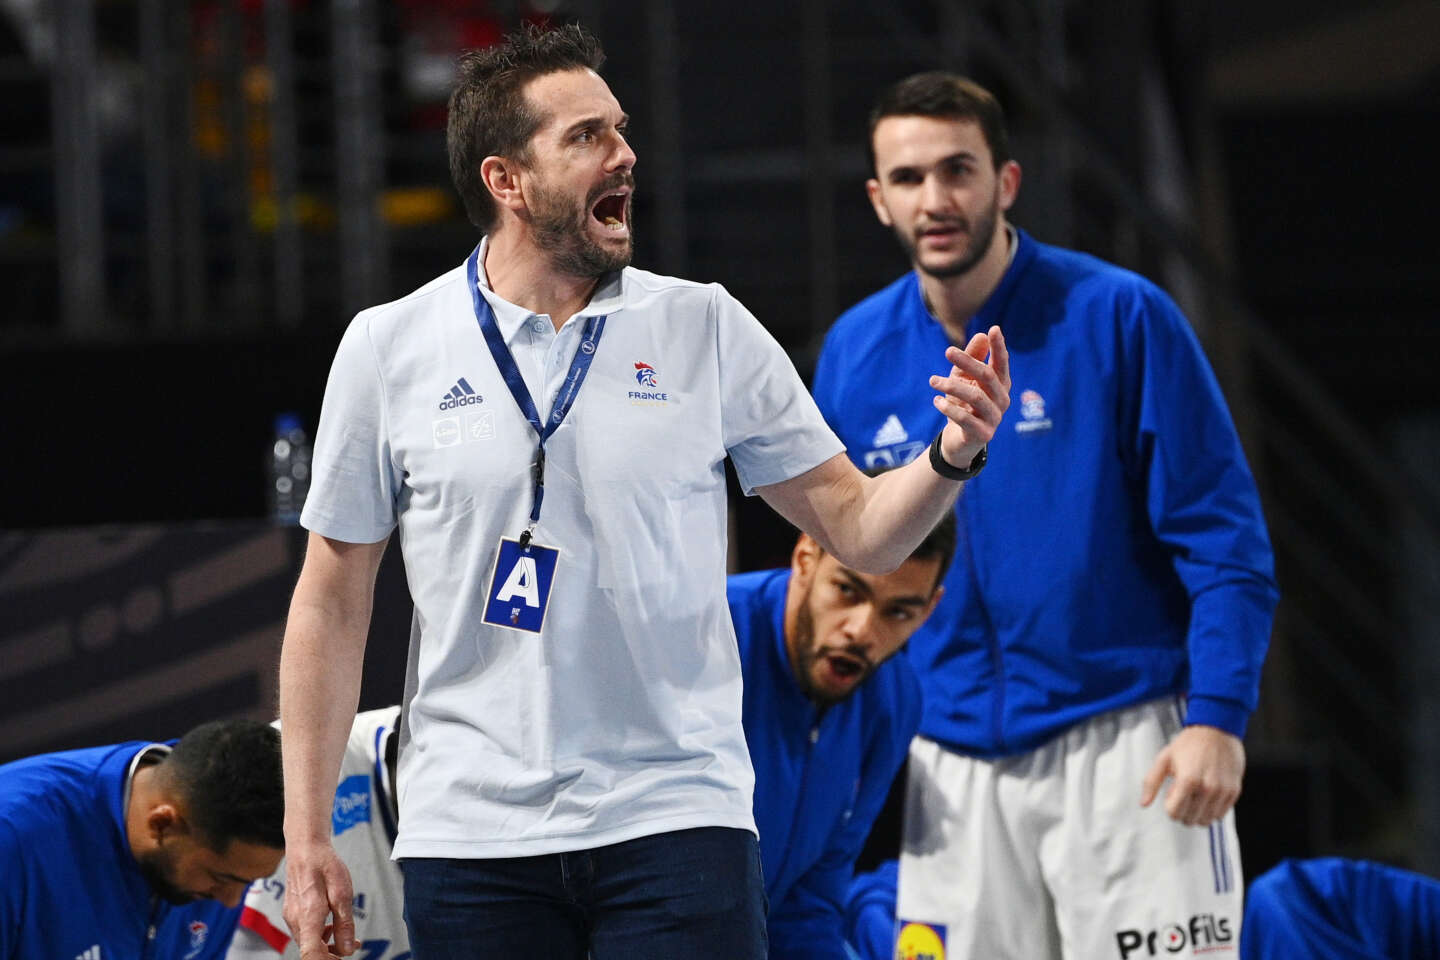 Handball World Cup 2023 revenge, France aims for the title